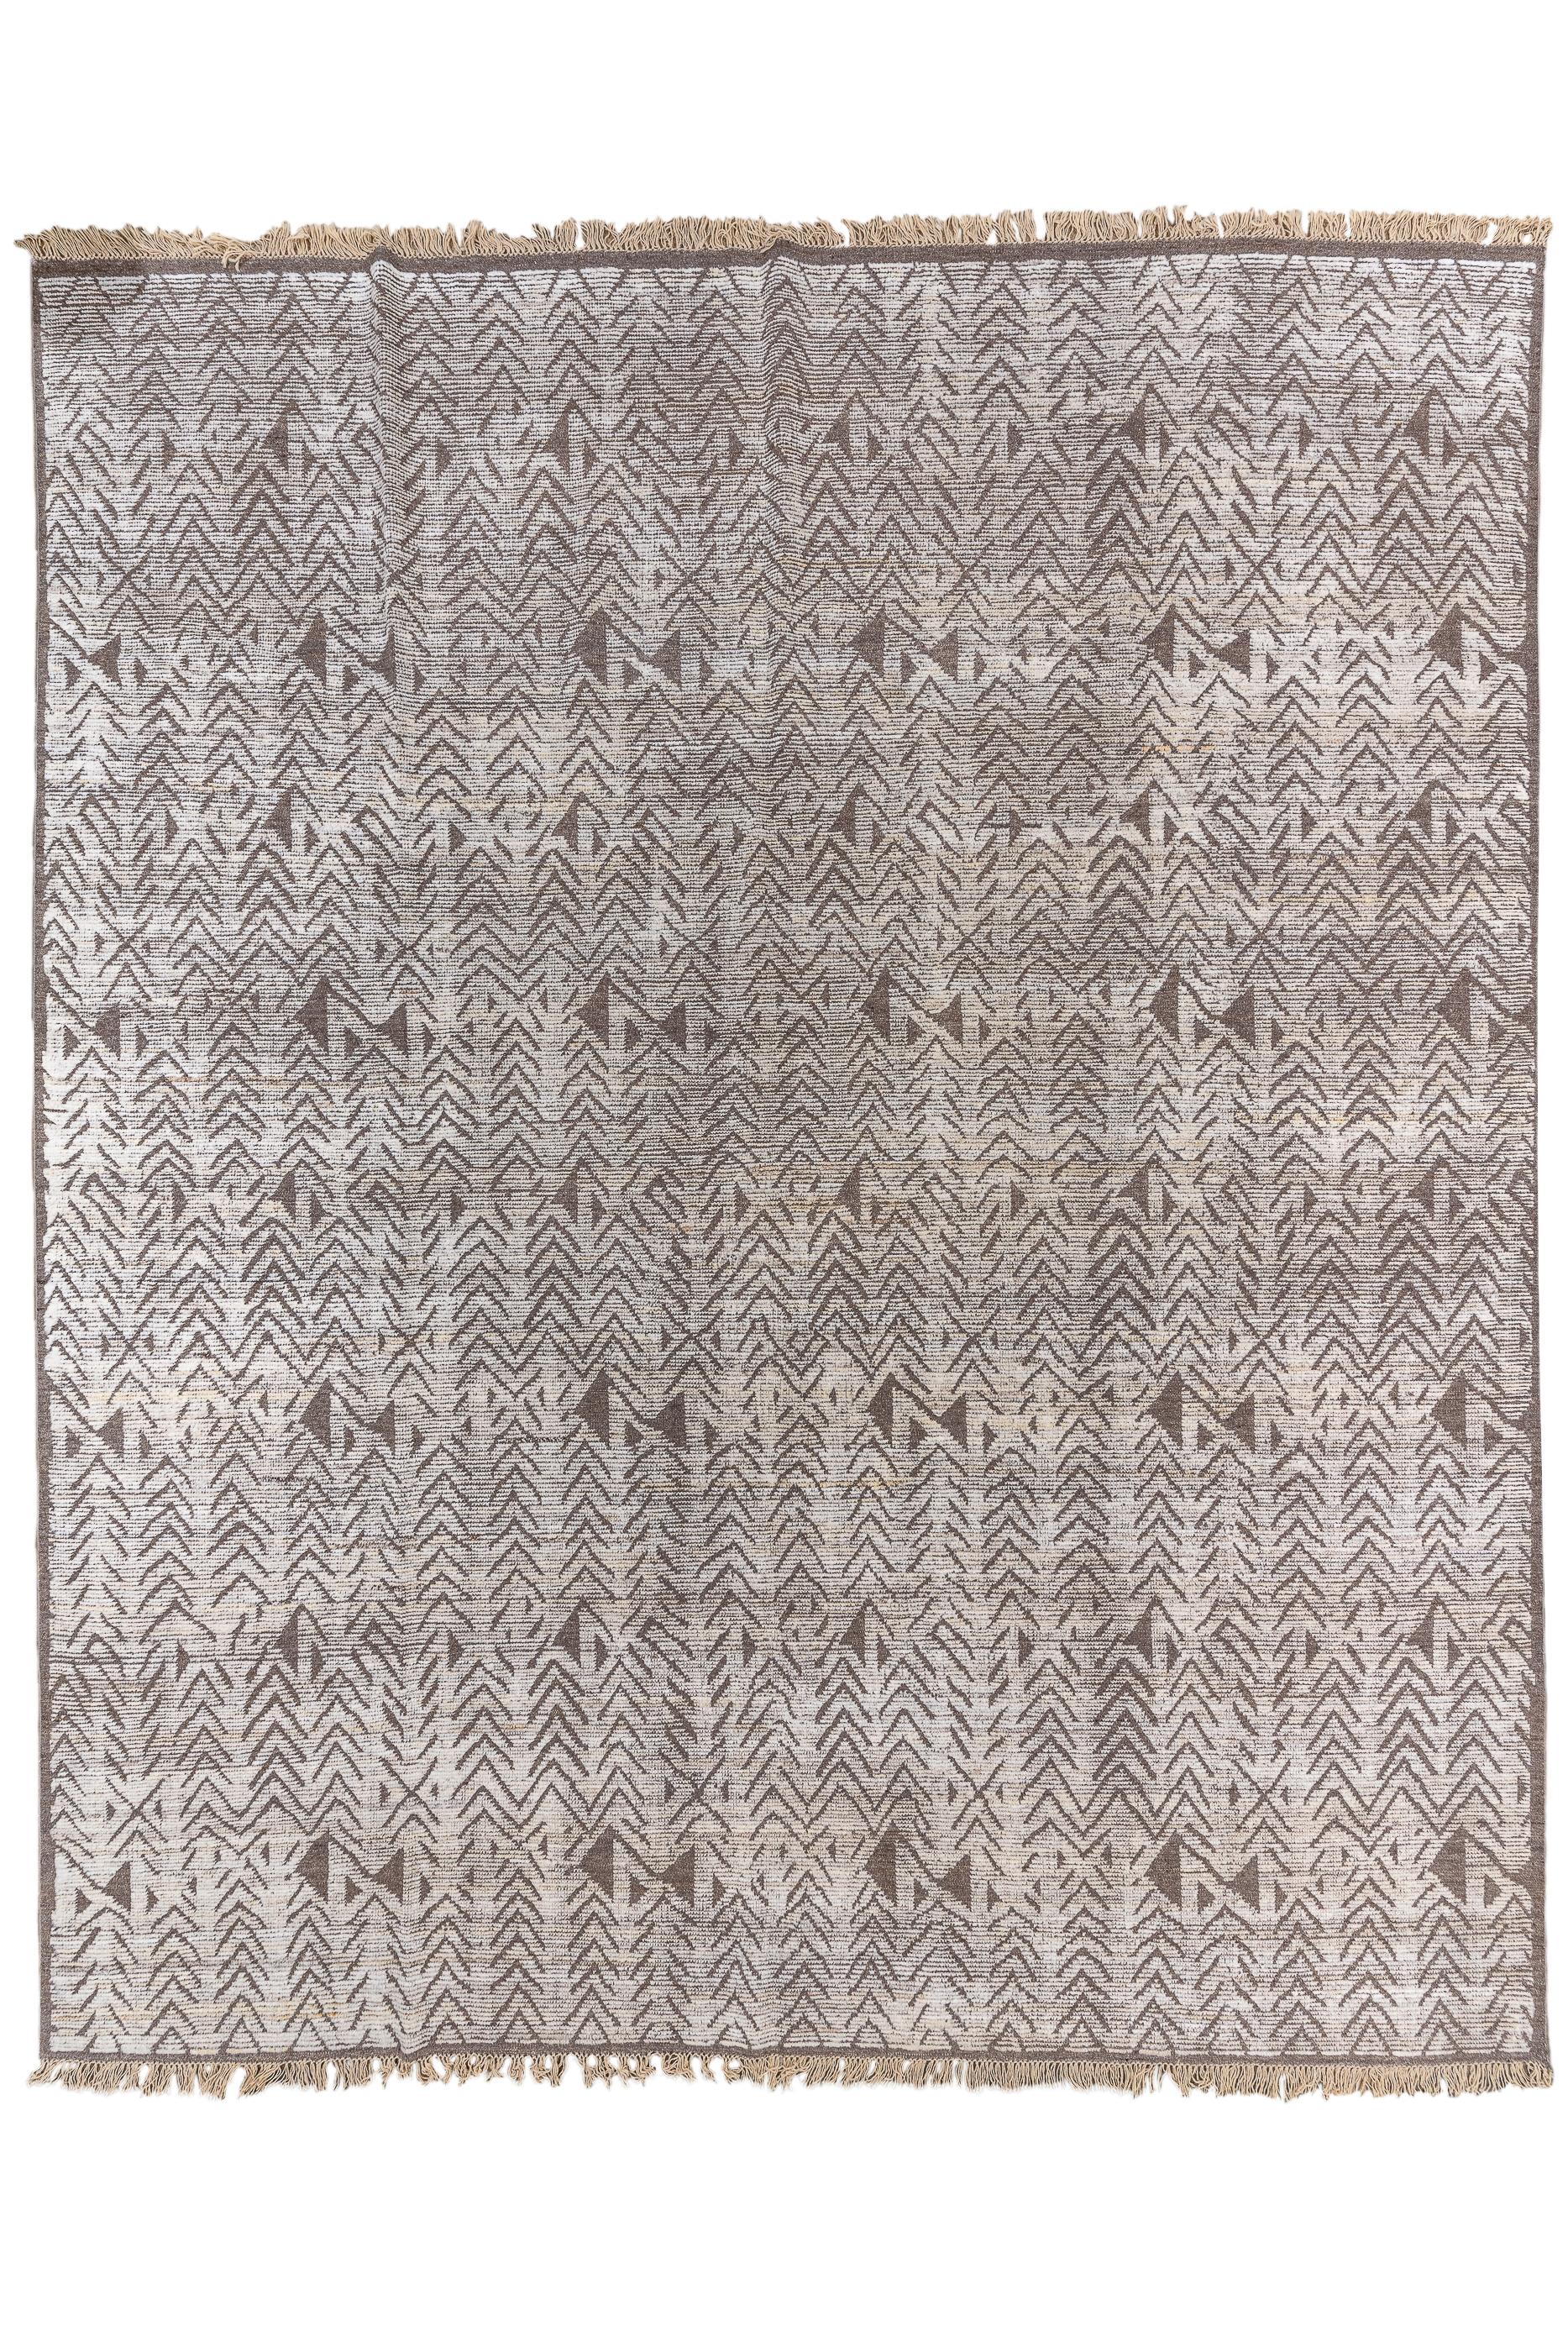 An exceptionally large Tulu with a richly abrashed pearl ecru ground presenting slender columns of floating herringbone chevrons, periodically interrupted by geometric dark brown lazy S’s. Very narrow plain dark brown frame. Coarse, recumbent weave.